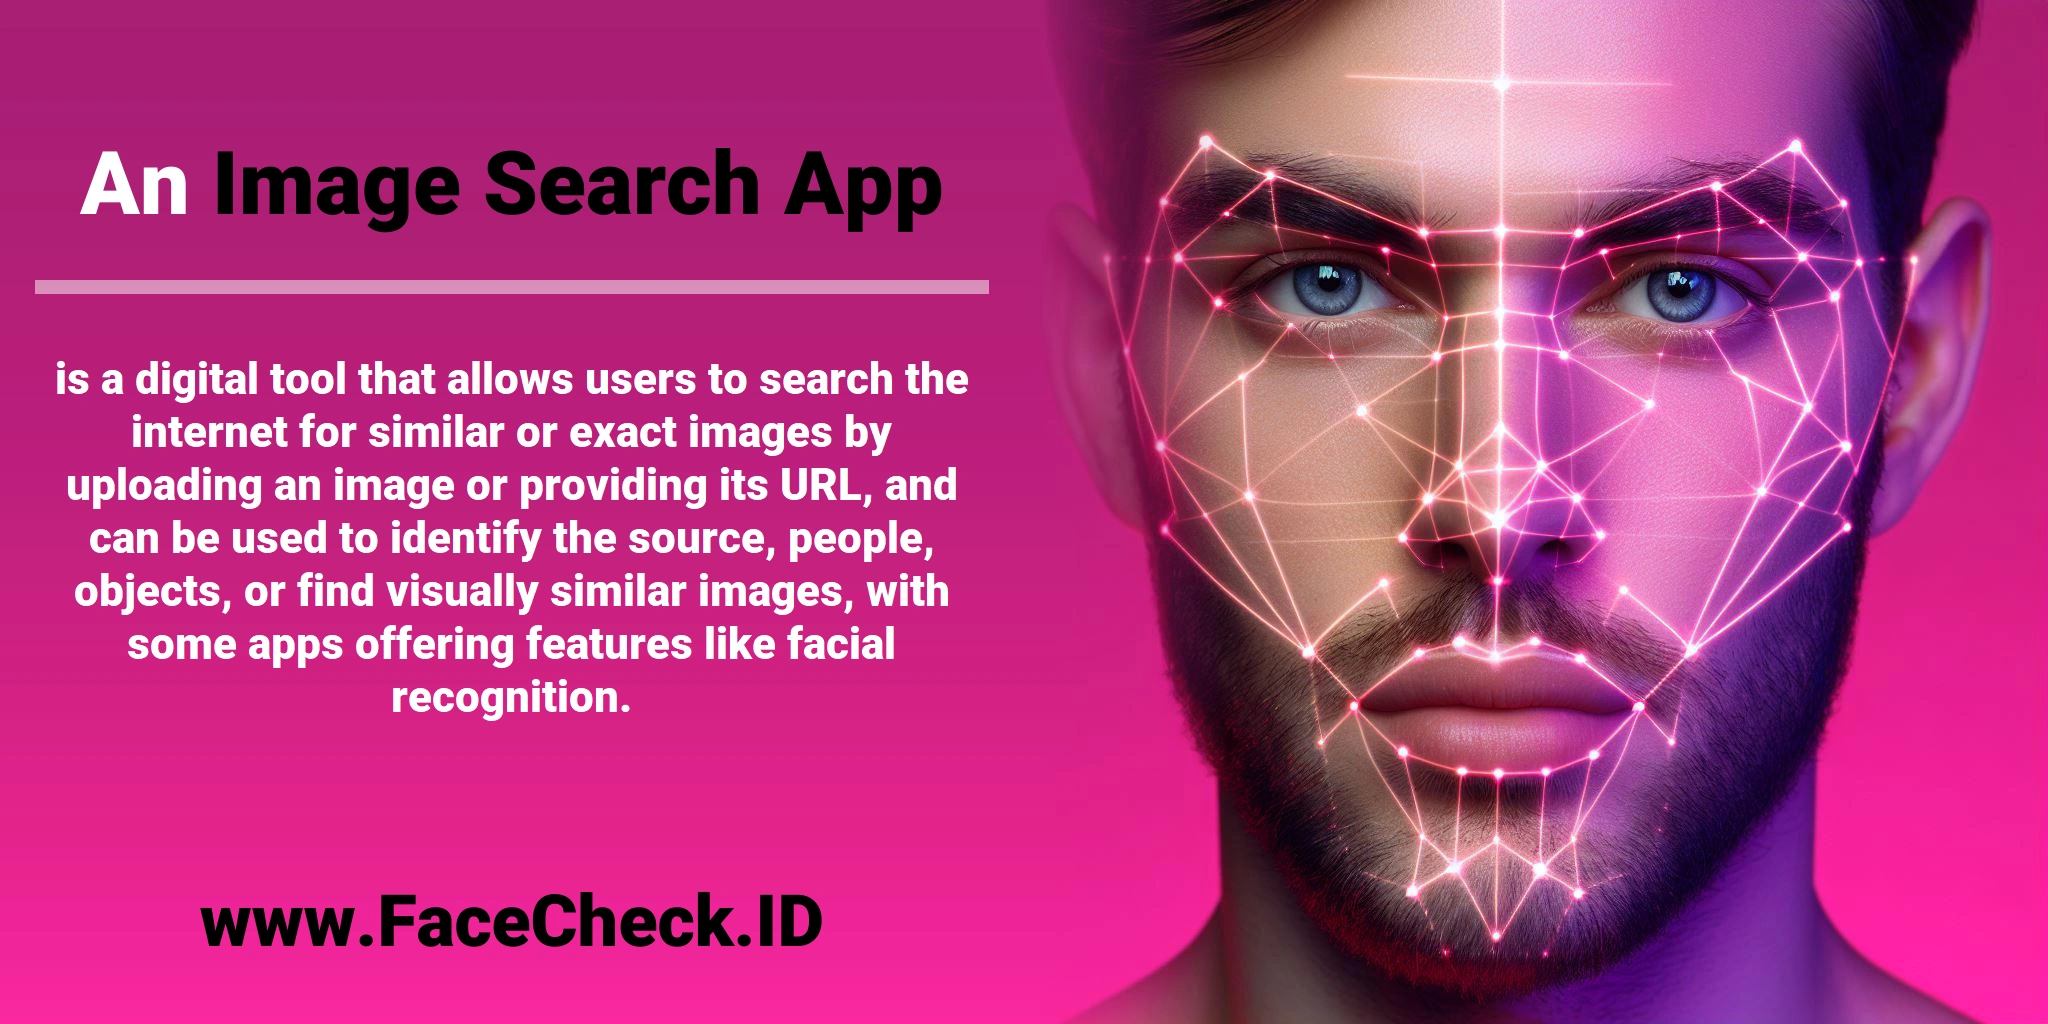 An <b>Image Search App</b> is a digital tool that allows users to search the internet for similar or exact images by uploading an image or providing its URL, and can be used to identify the source, people, objects, or find visually similar images, with some apps offering features like facial recognition.